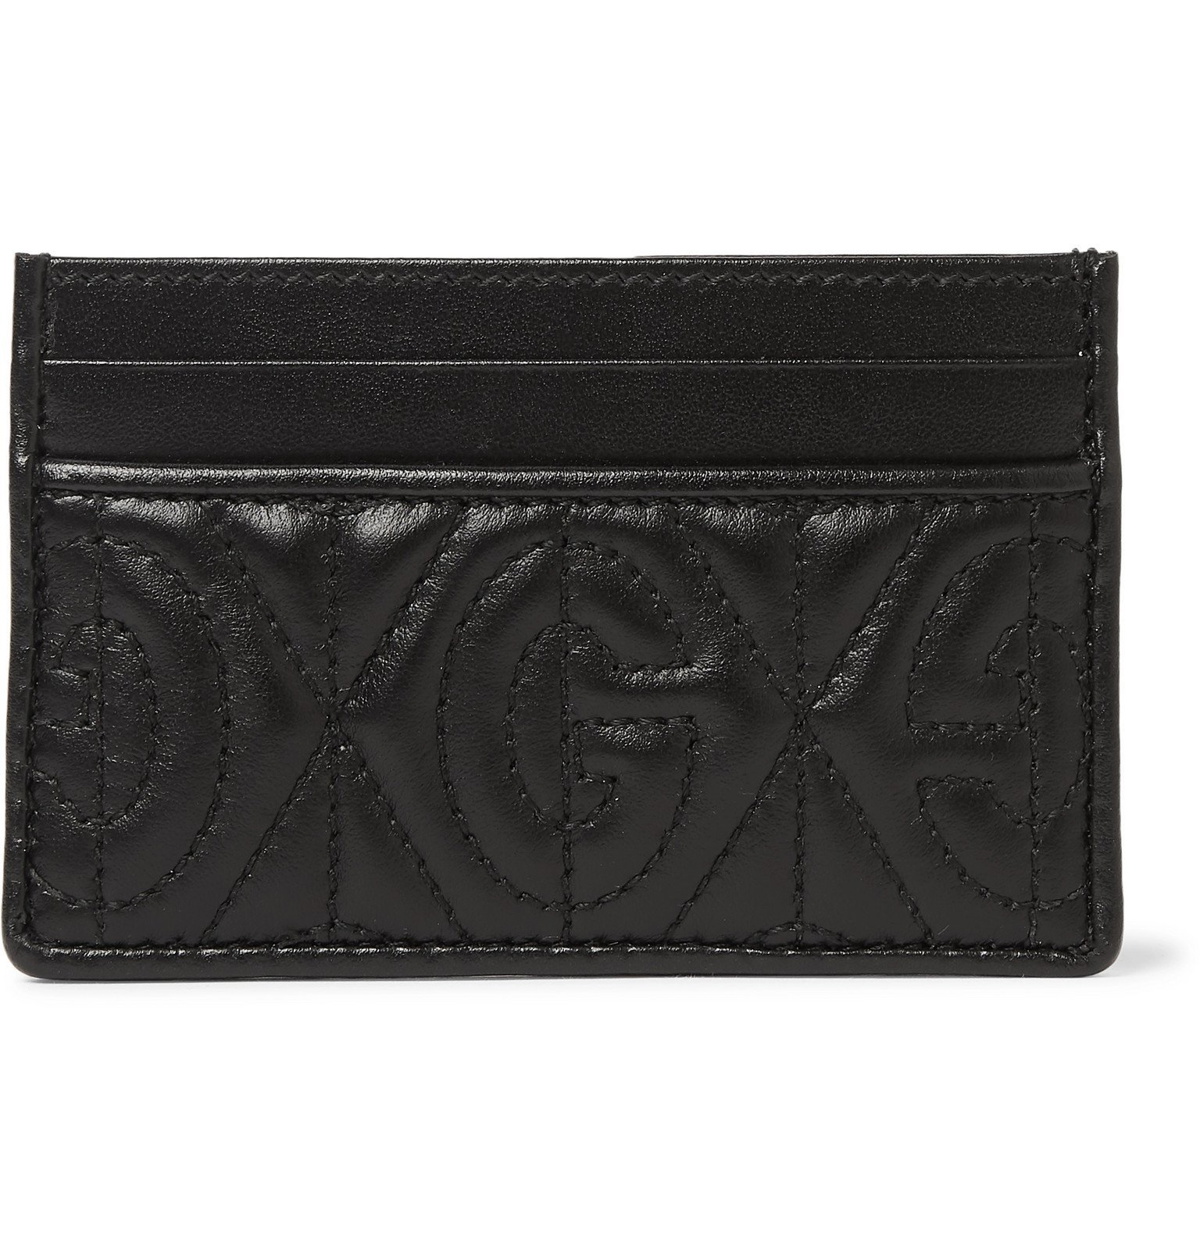 Gucci - Rhombus Quilted Leather Cardholder - Black Gucci